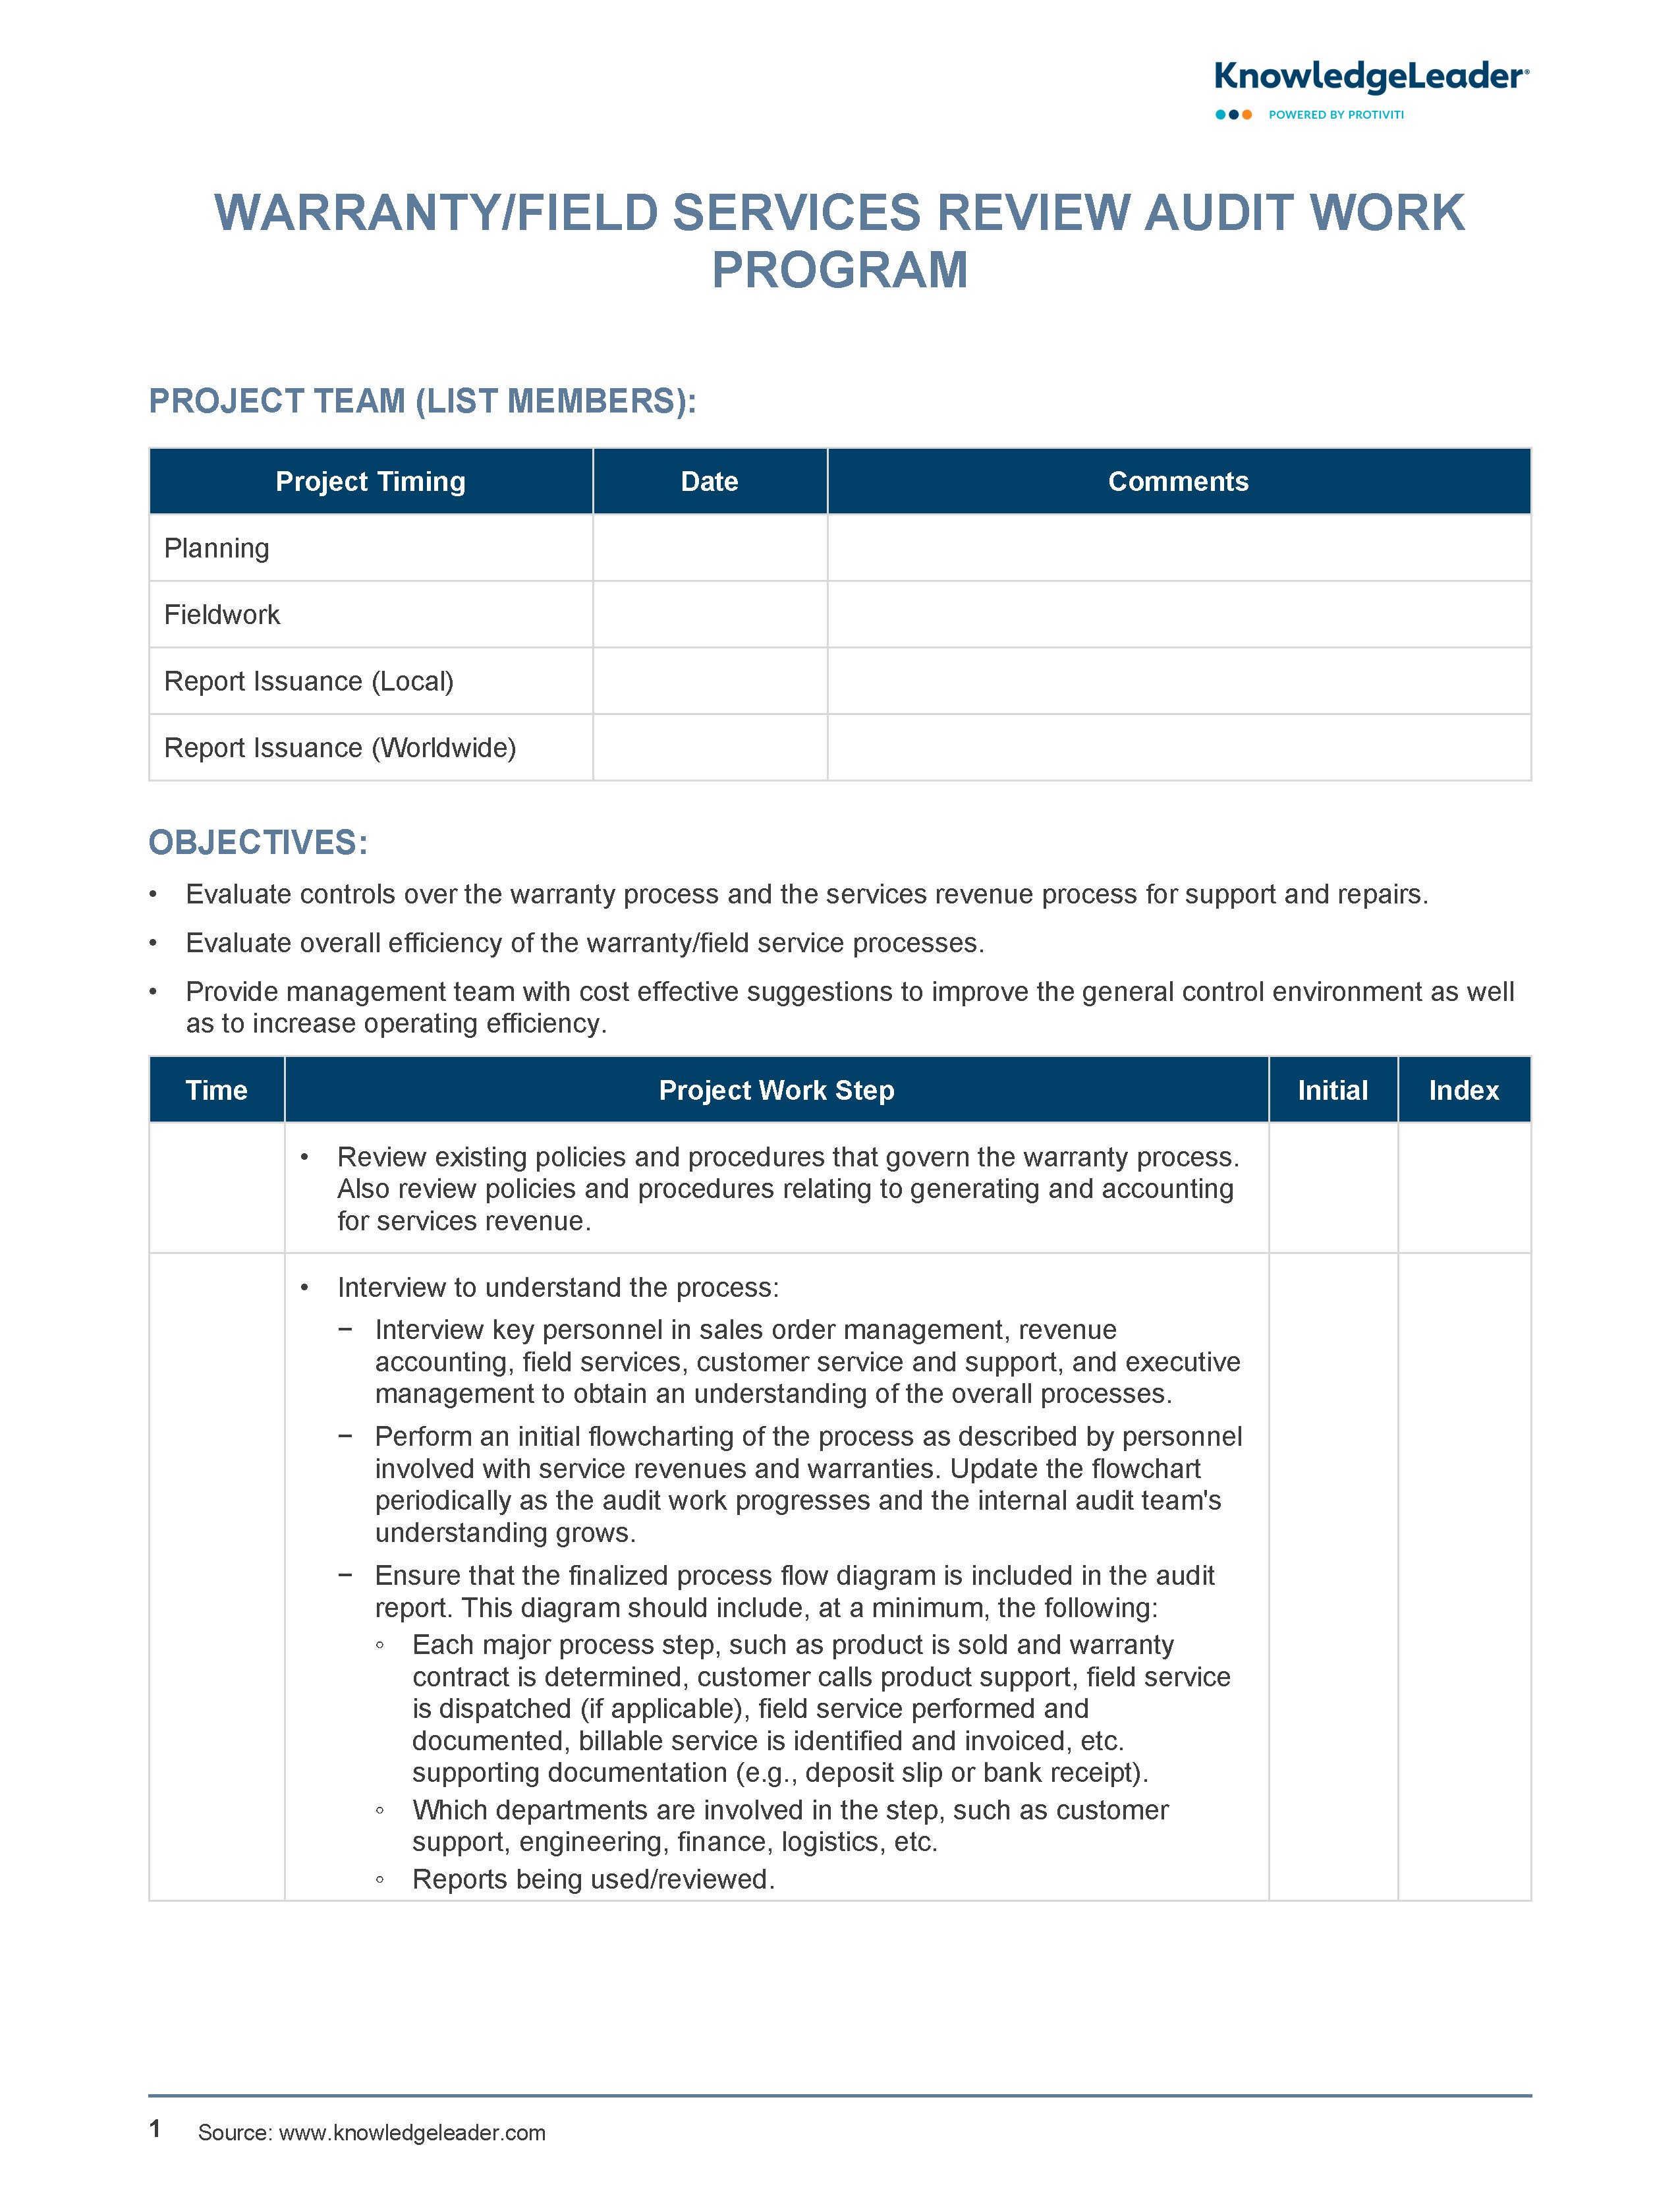 screenshot of the first page of Warranty/Field Services Review Audit Work Program